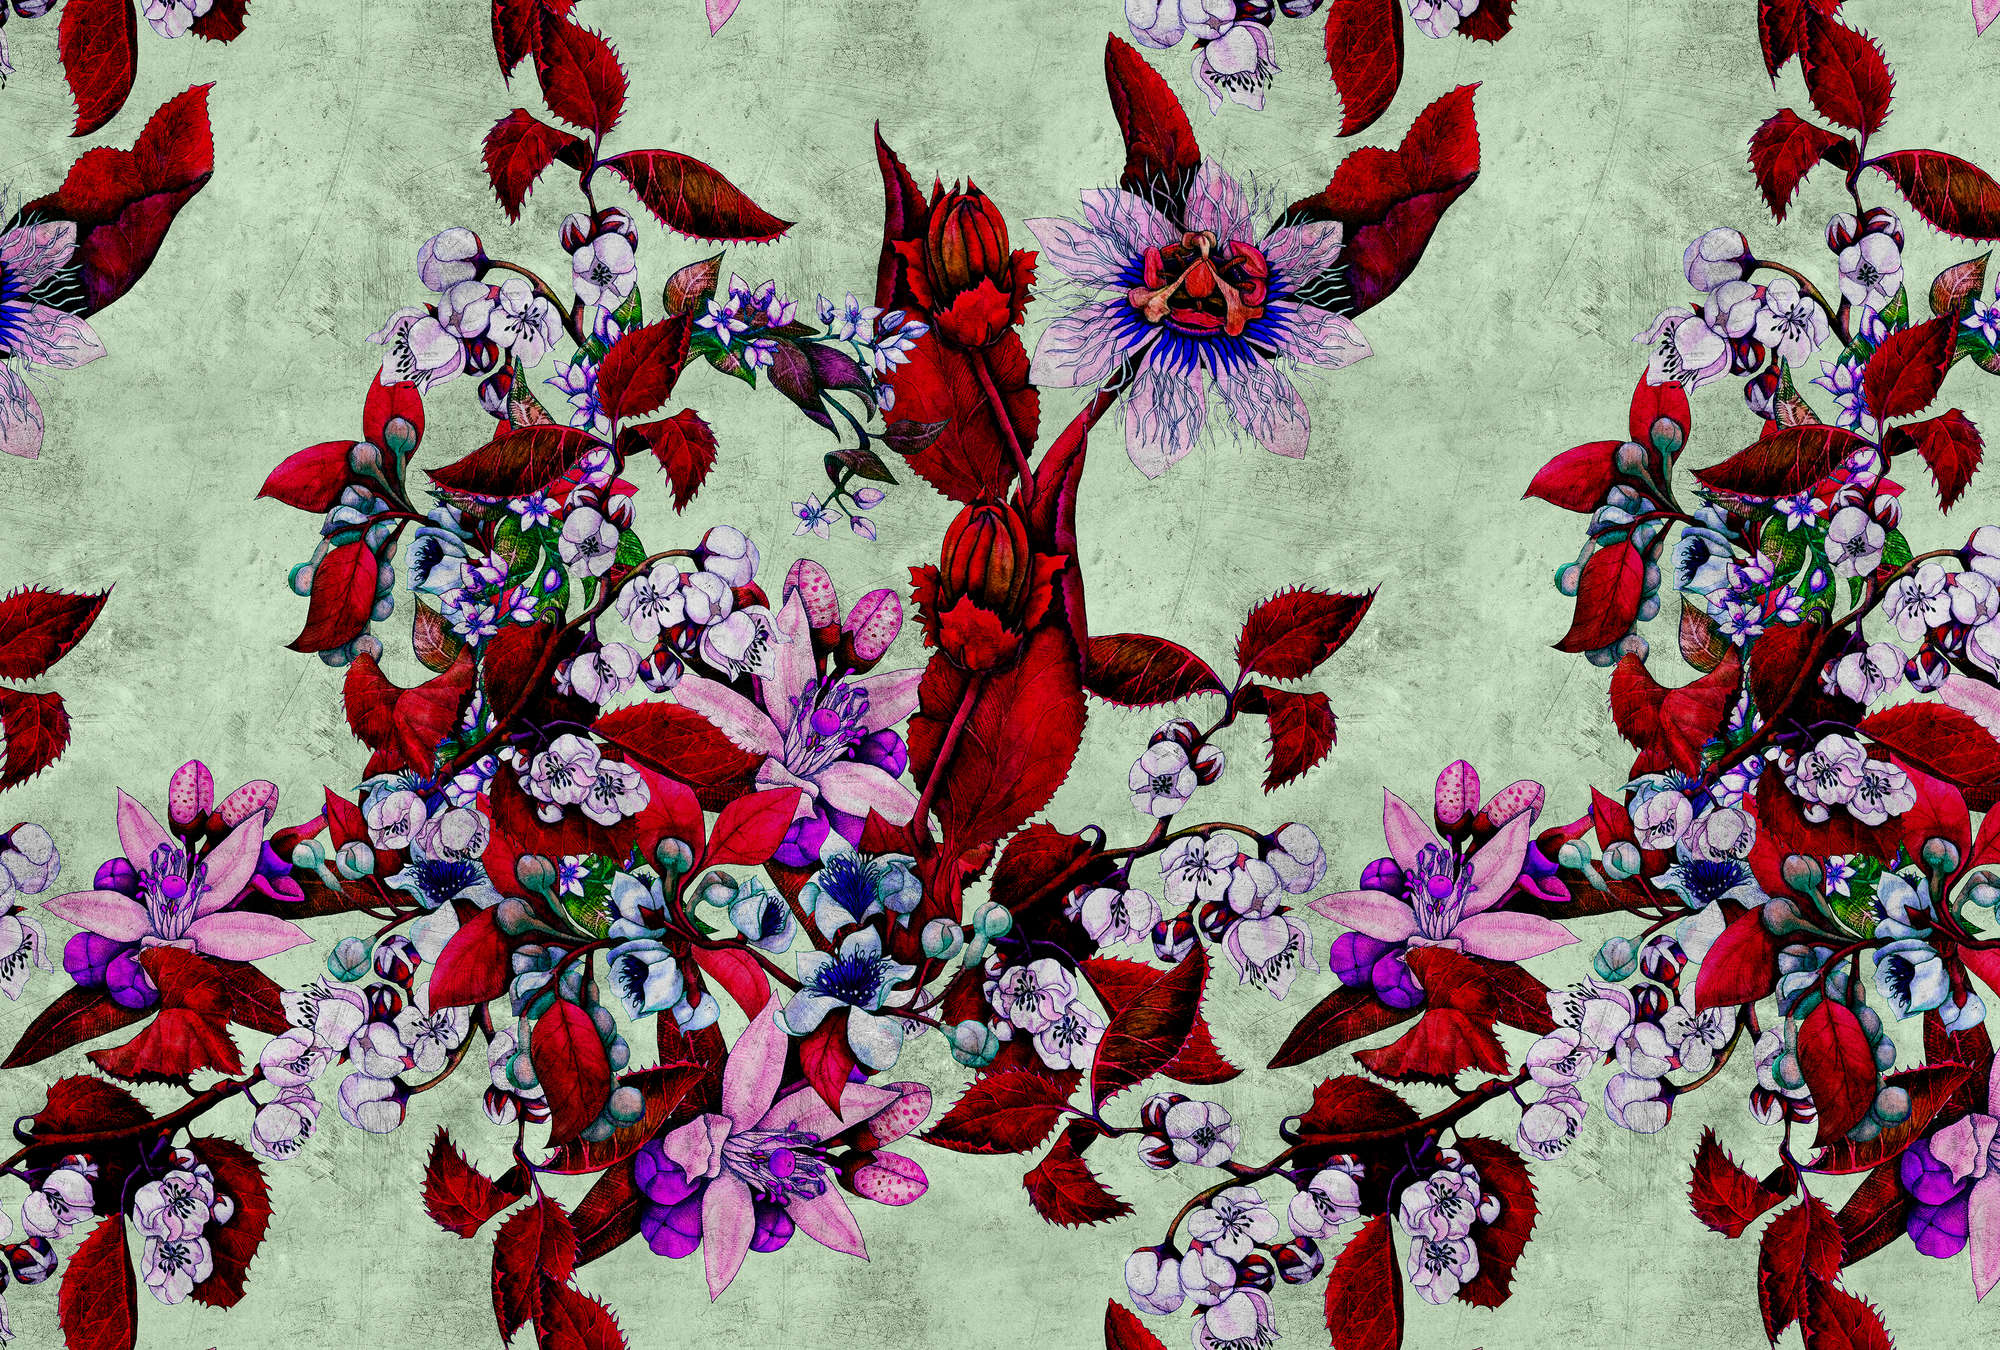             Tropical Passion 3 - Photo wallpaper with playful floral design - Scratch Texture - Green, Red | Texture non-woven
        